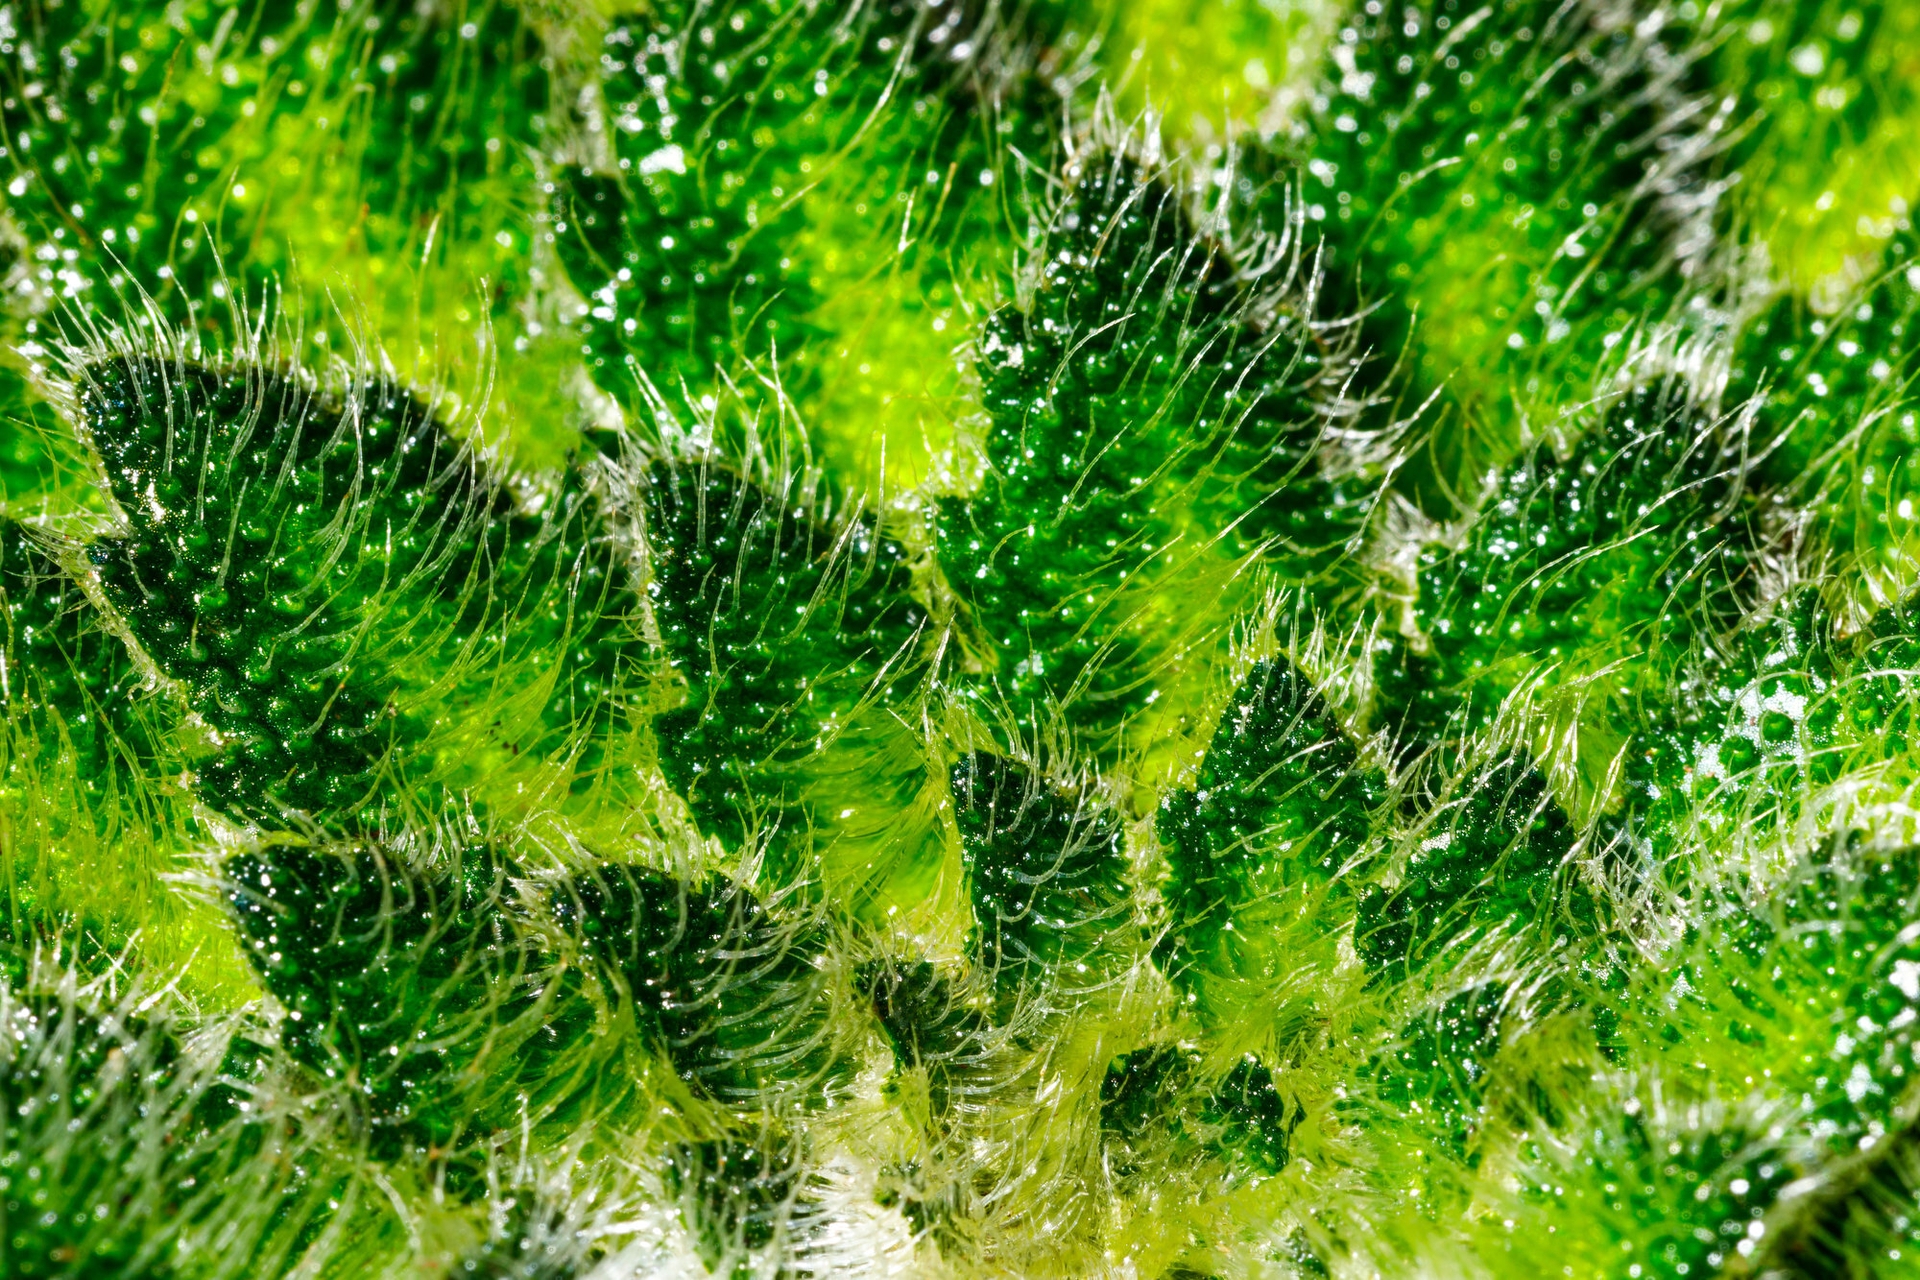 Macro photography of some of the 40,000 plants in the Seattle Spheres